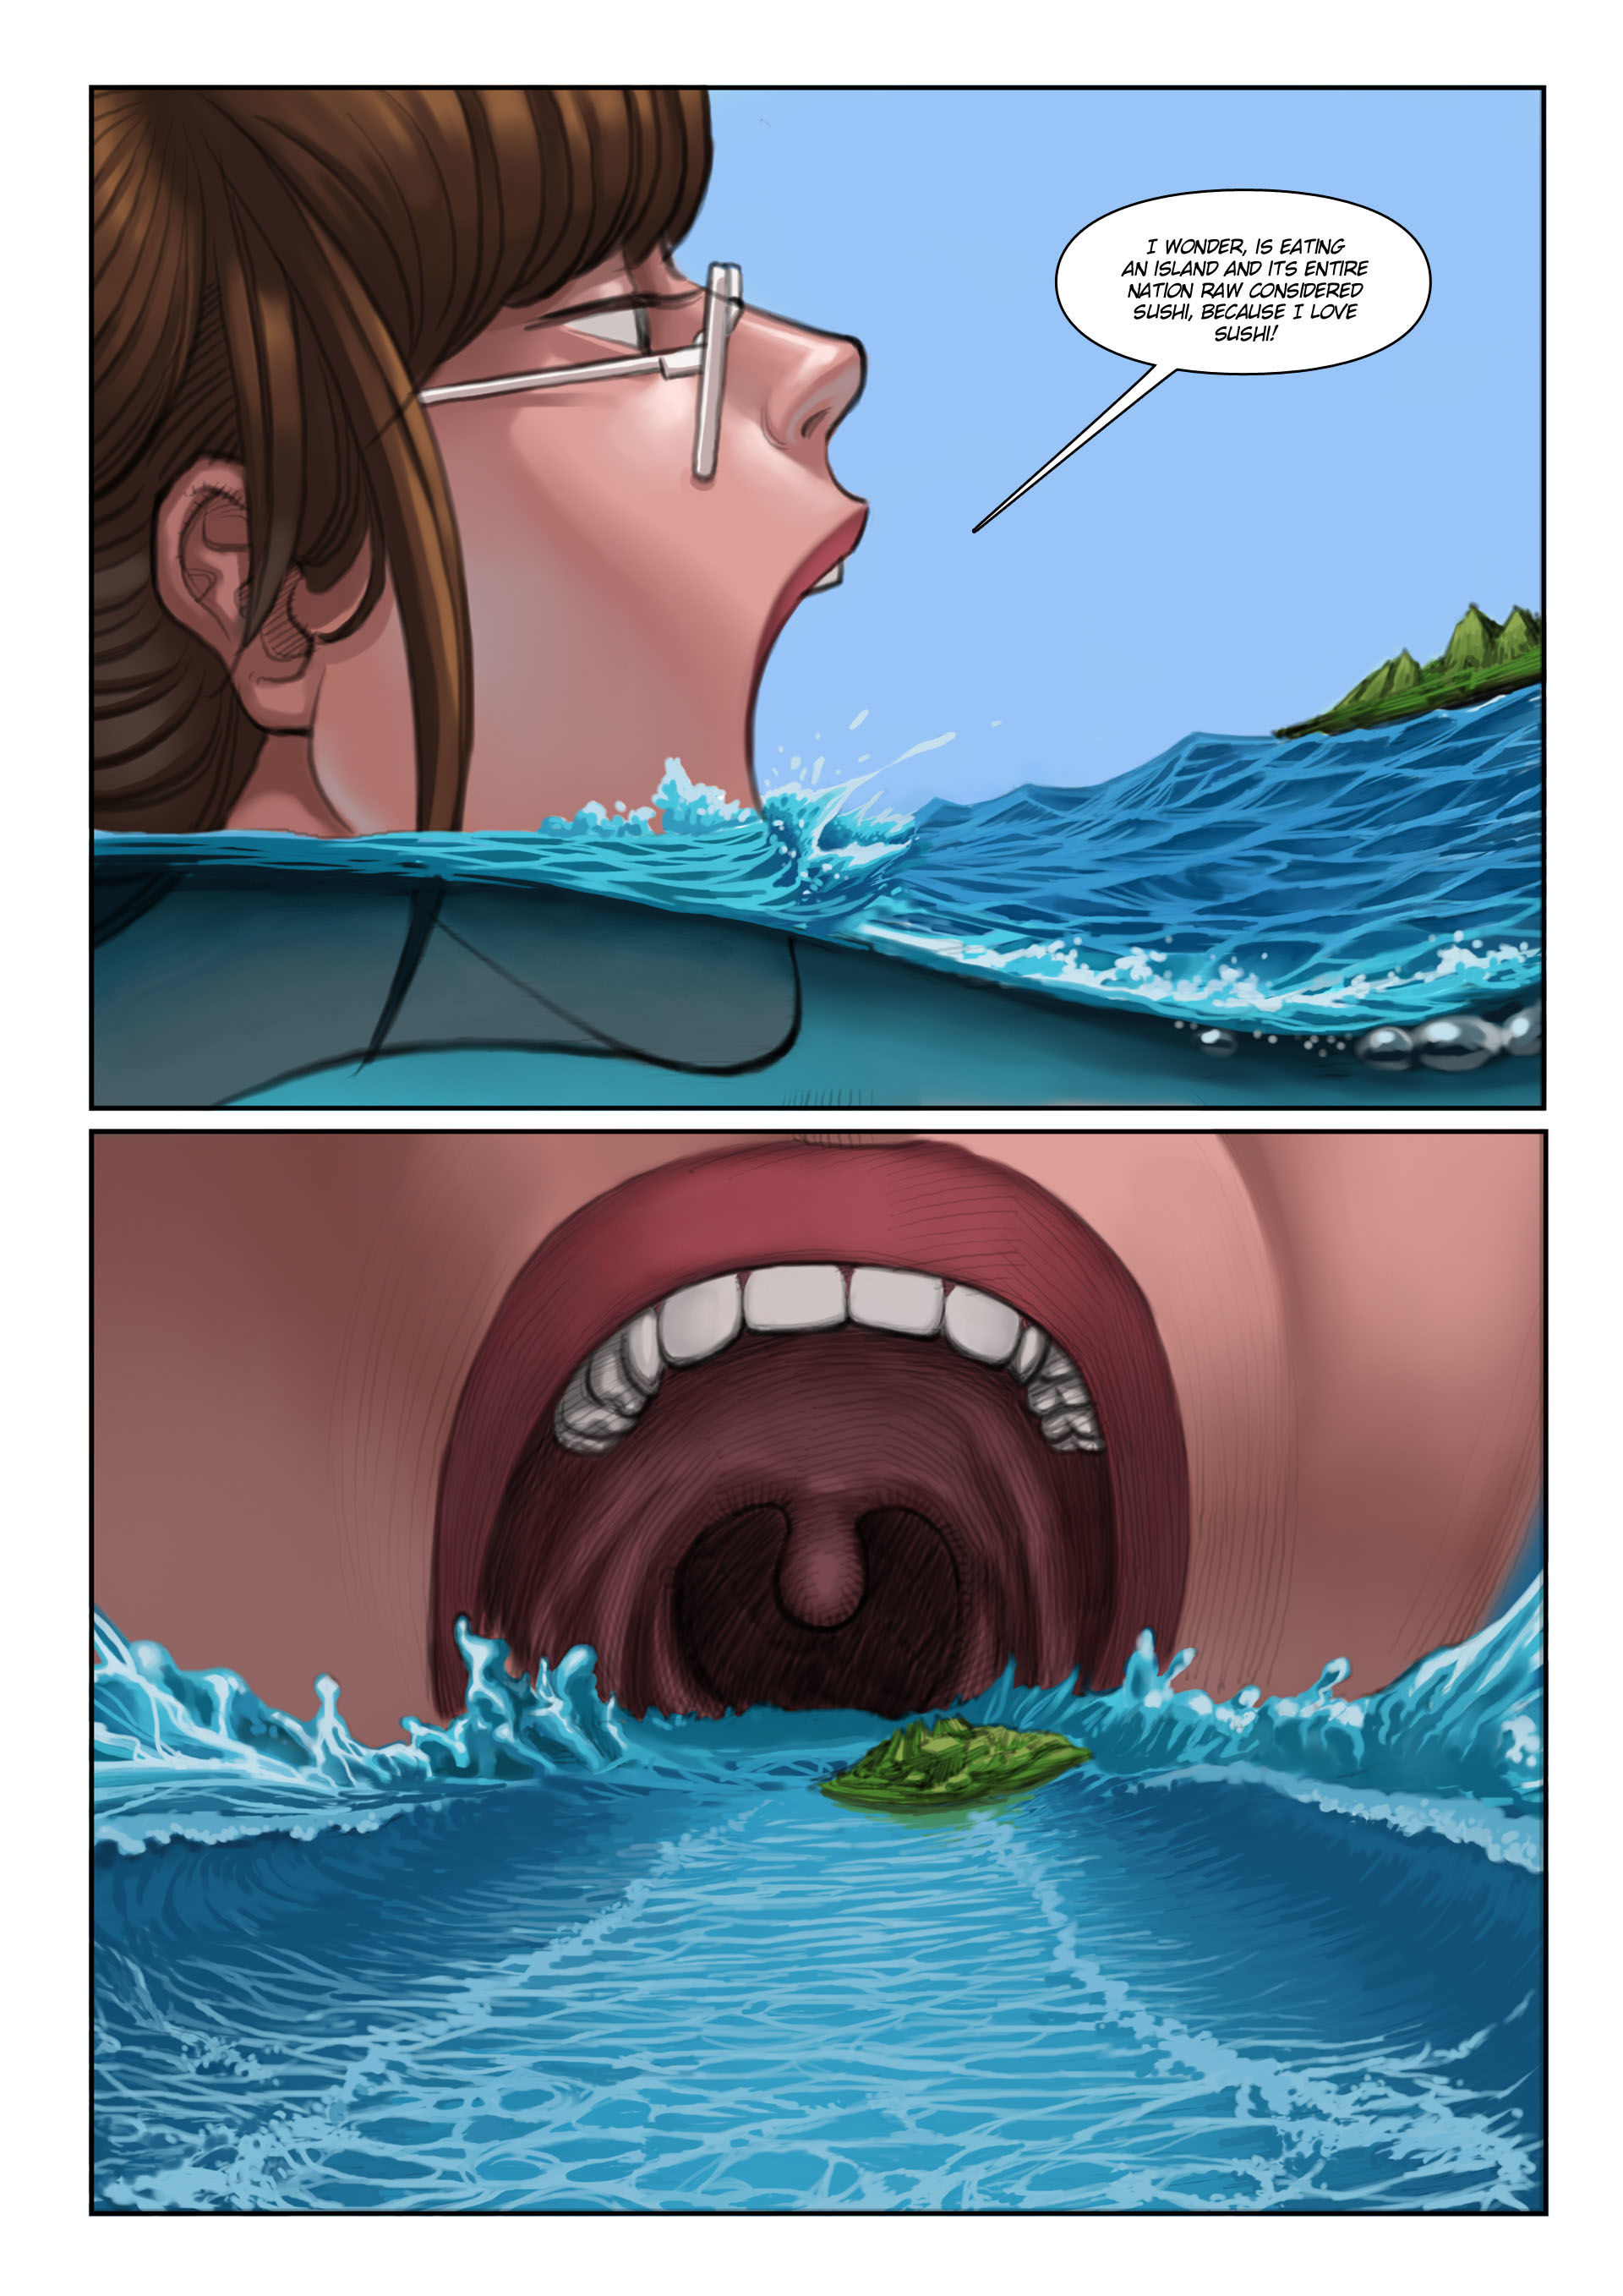 Growing Science Issue 2 Giantess Fan page 7.